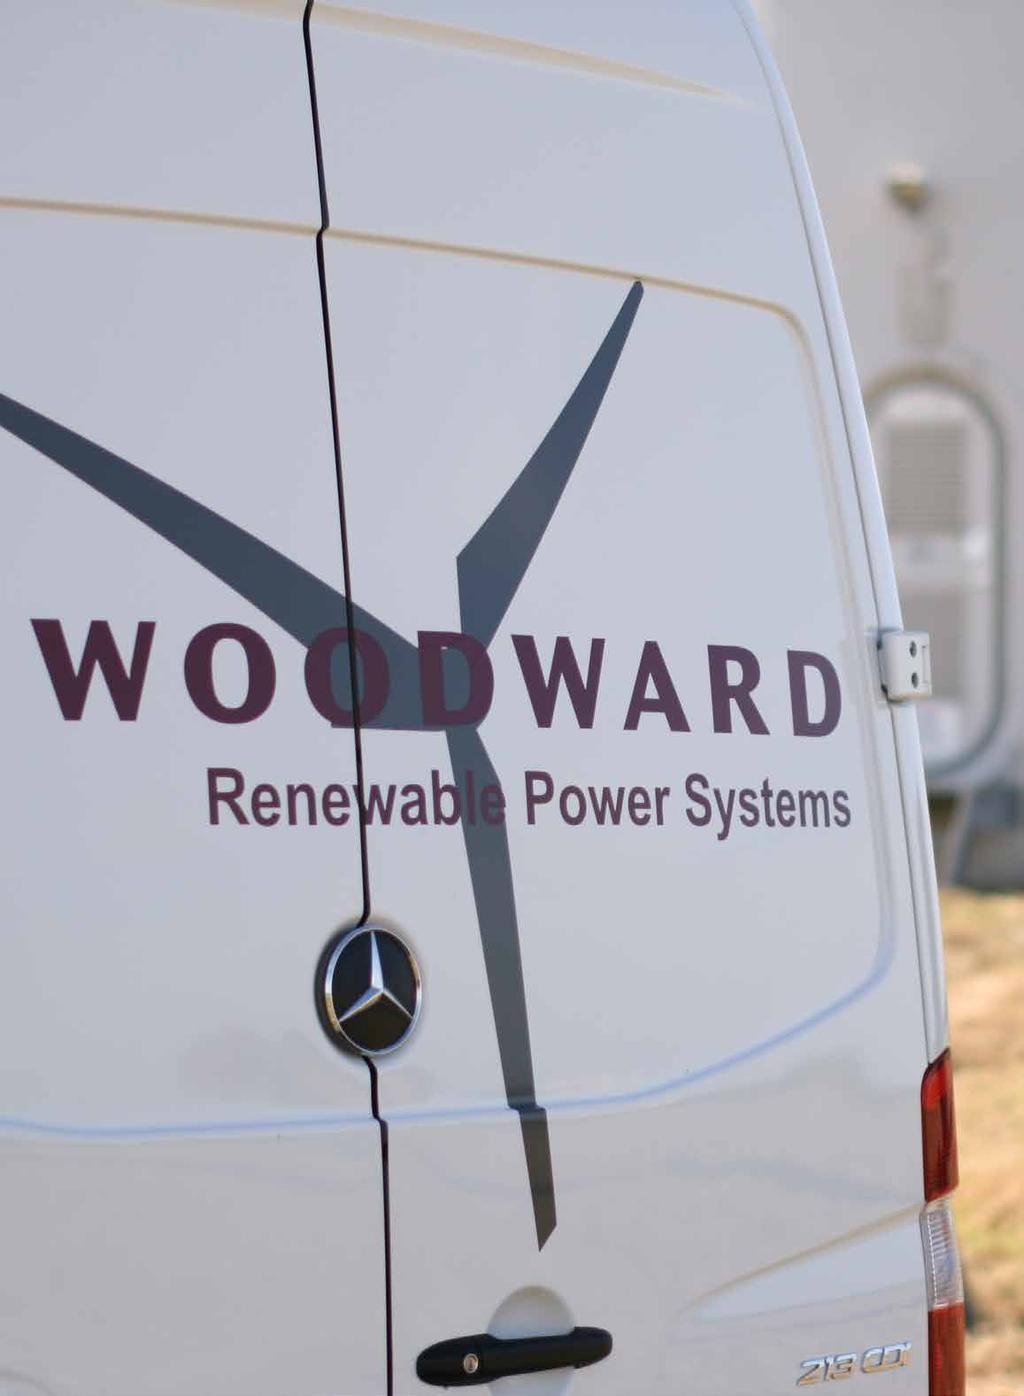 WOODWARD CONVERTER AS FIELD EXCHANGE Woodward provides a broad portfolio of exchange converters for the Service & Aftermarket. Take the advantage of CONCYCLE performance and our know-how.